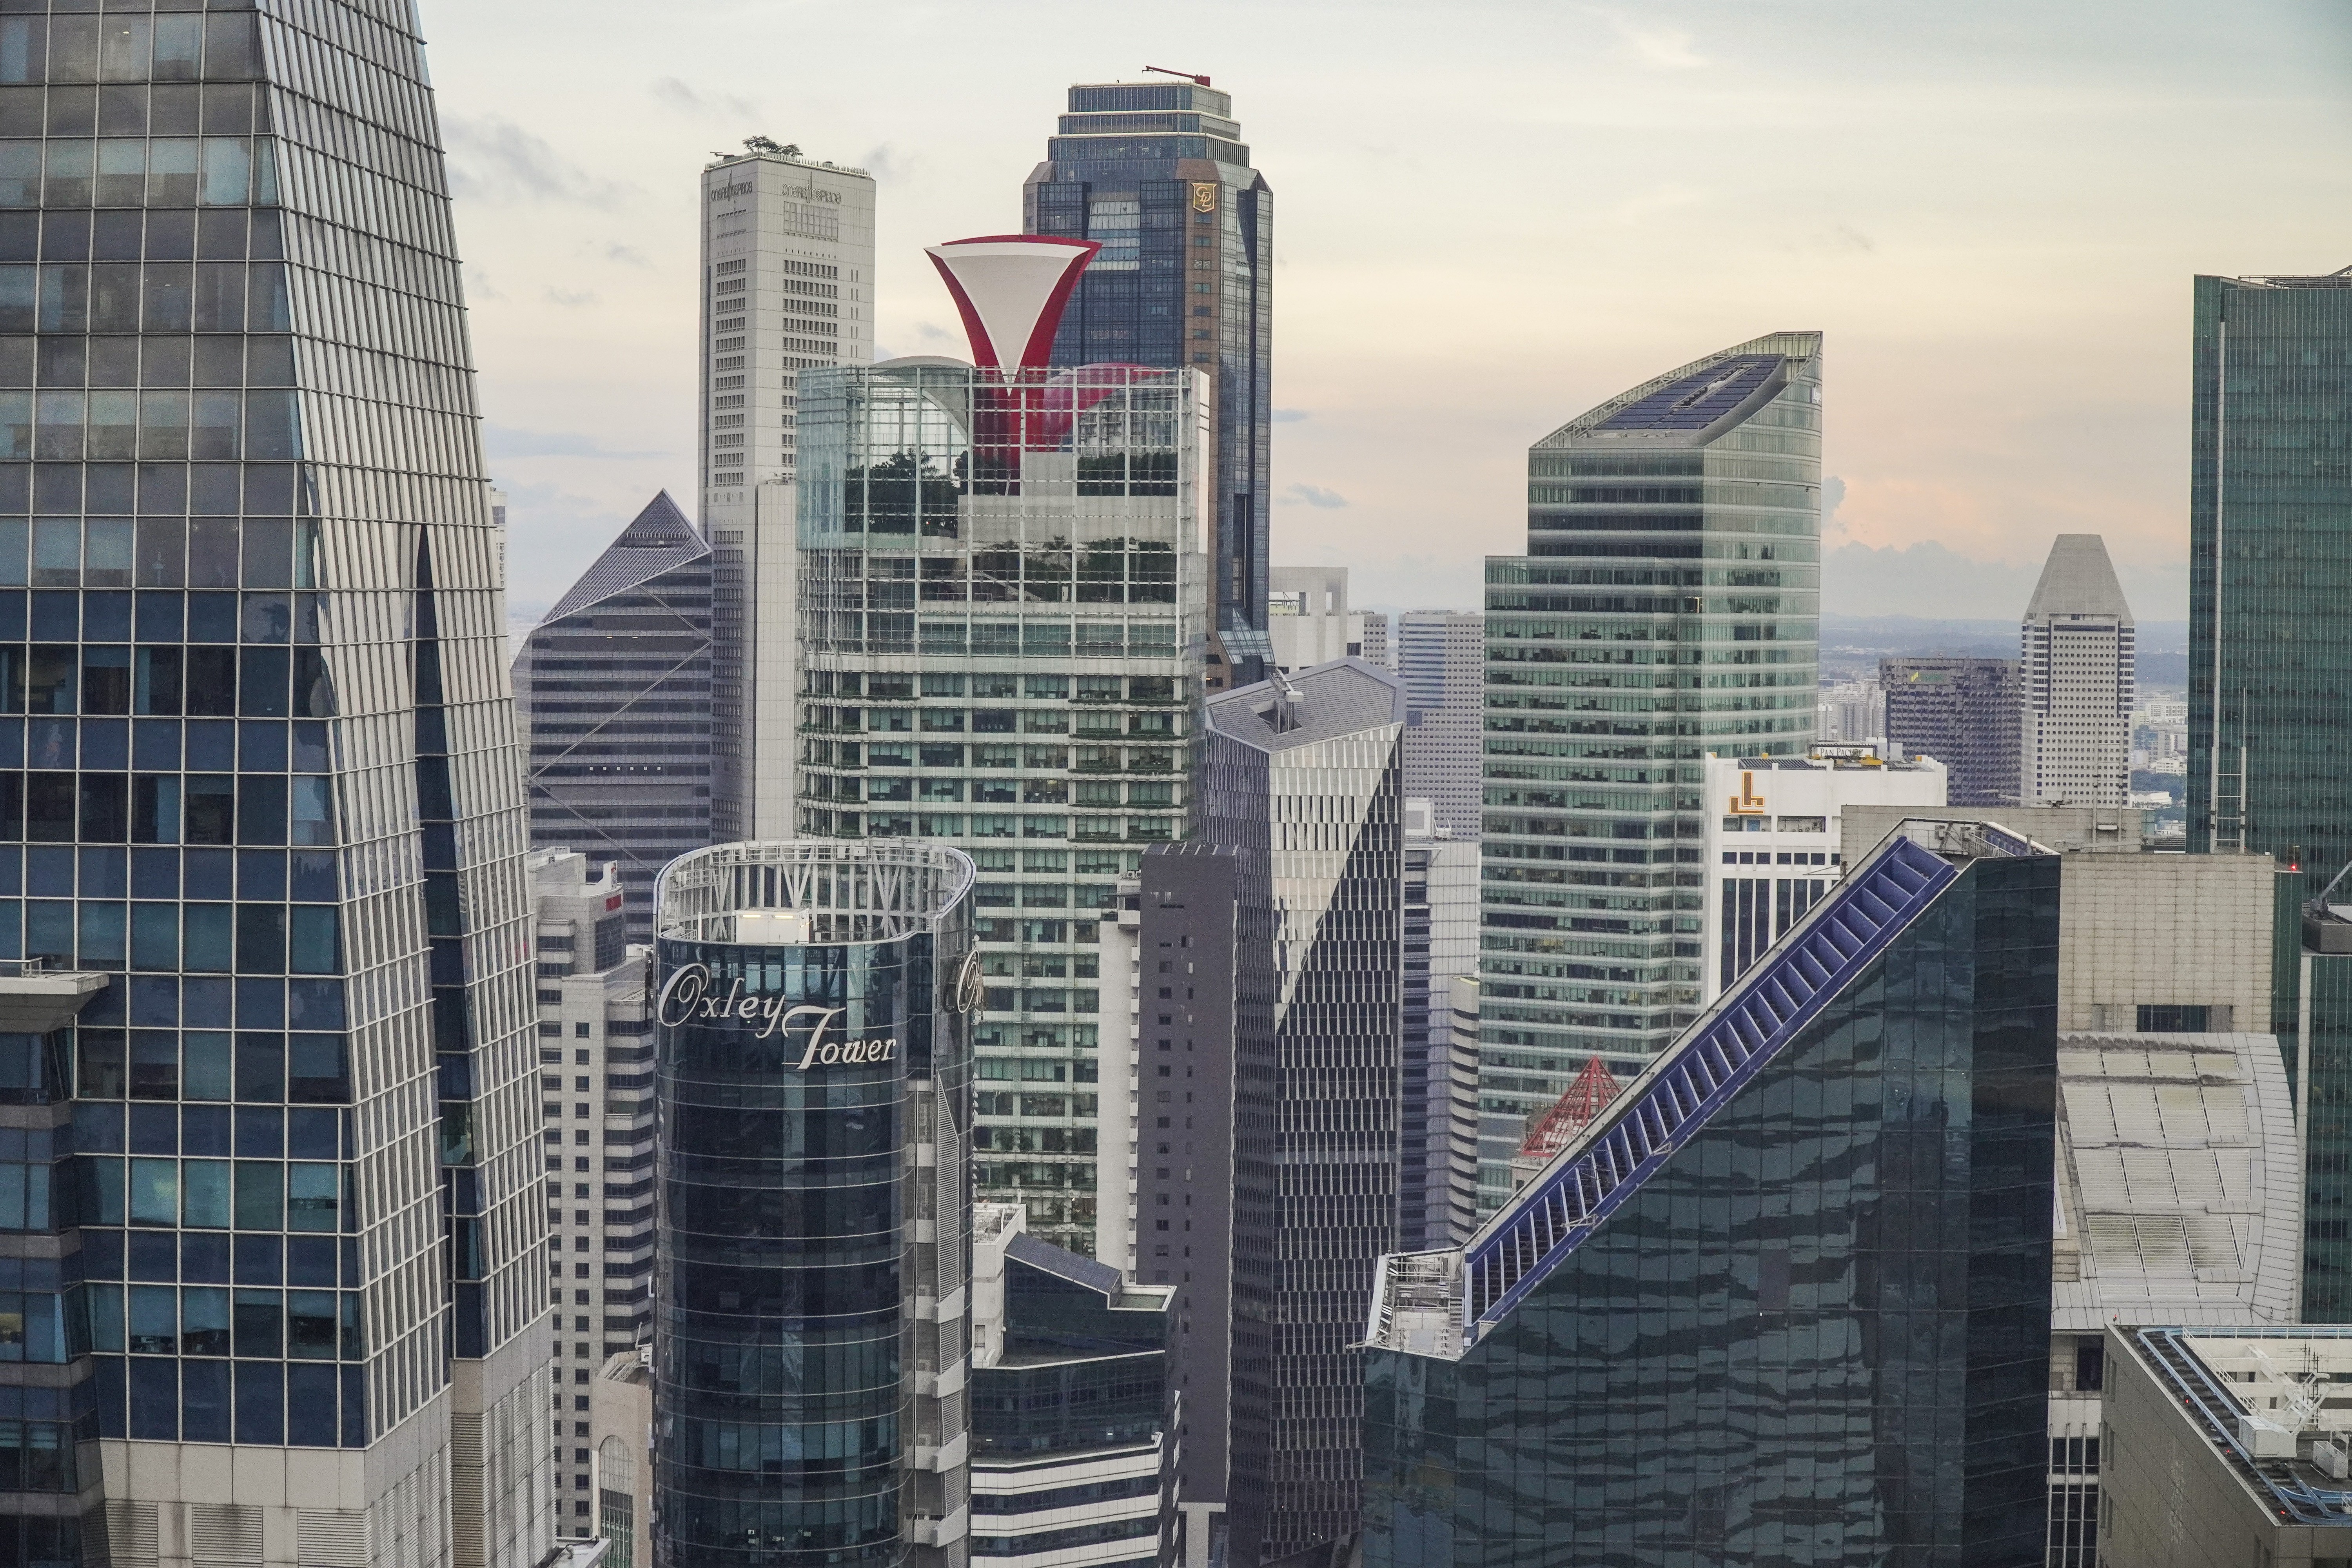 Image of commercial high rise buildings at Raffles Place in Singapore's Central Business District (CBD) on 27 May 2019. Photo: Roy Issa